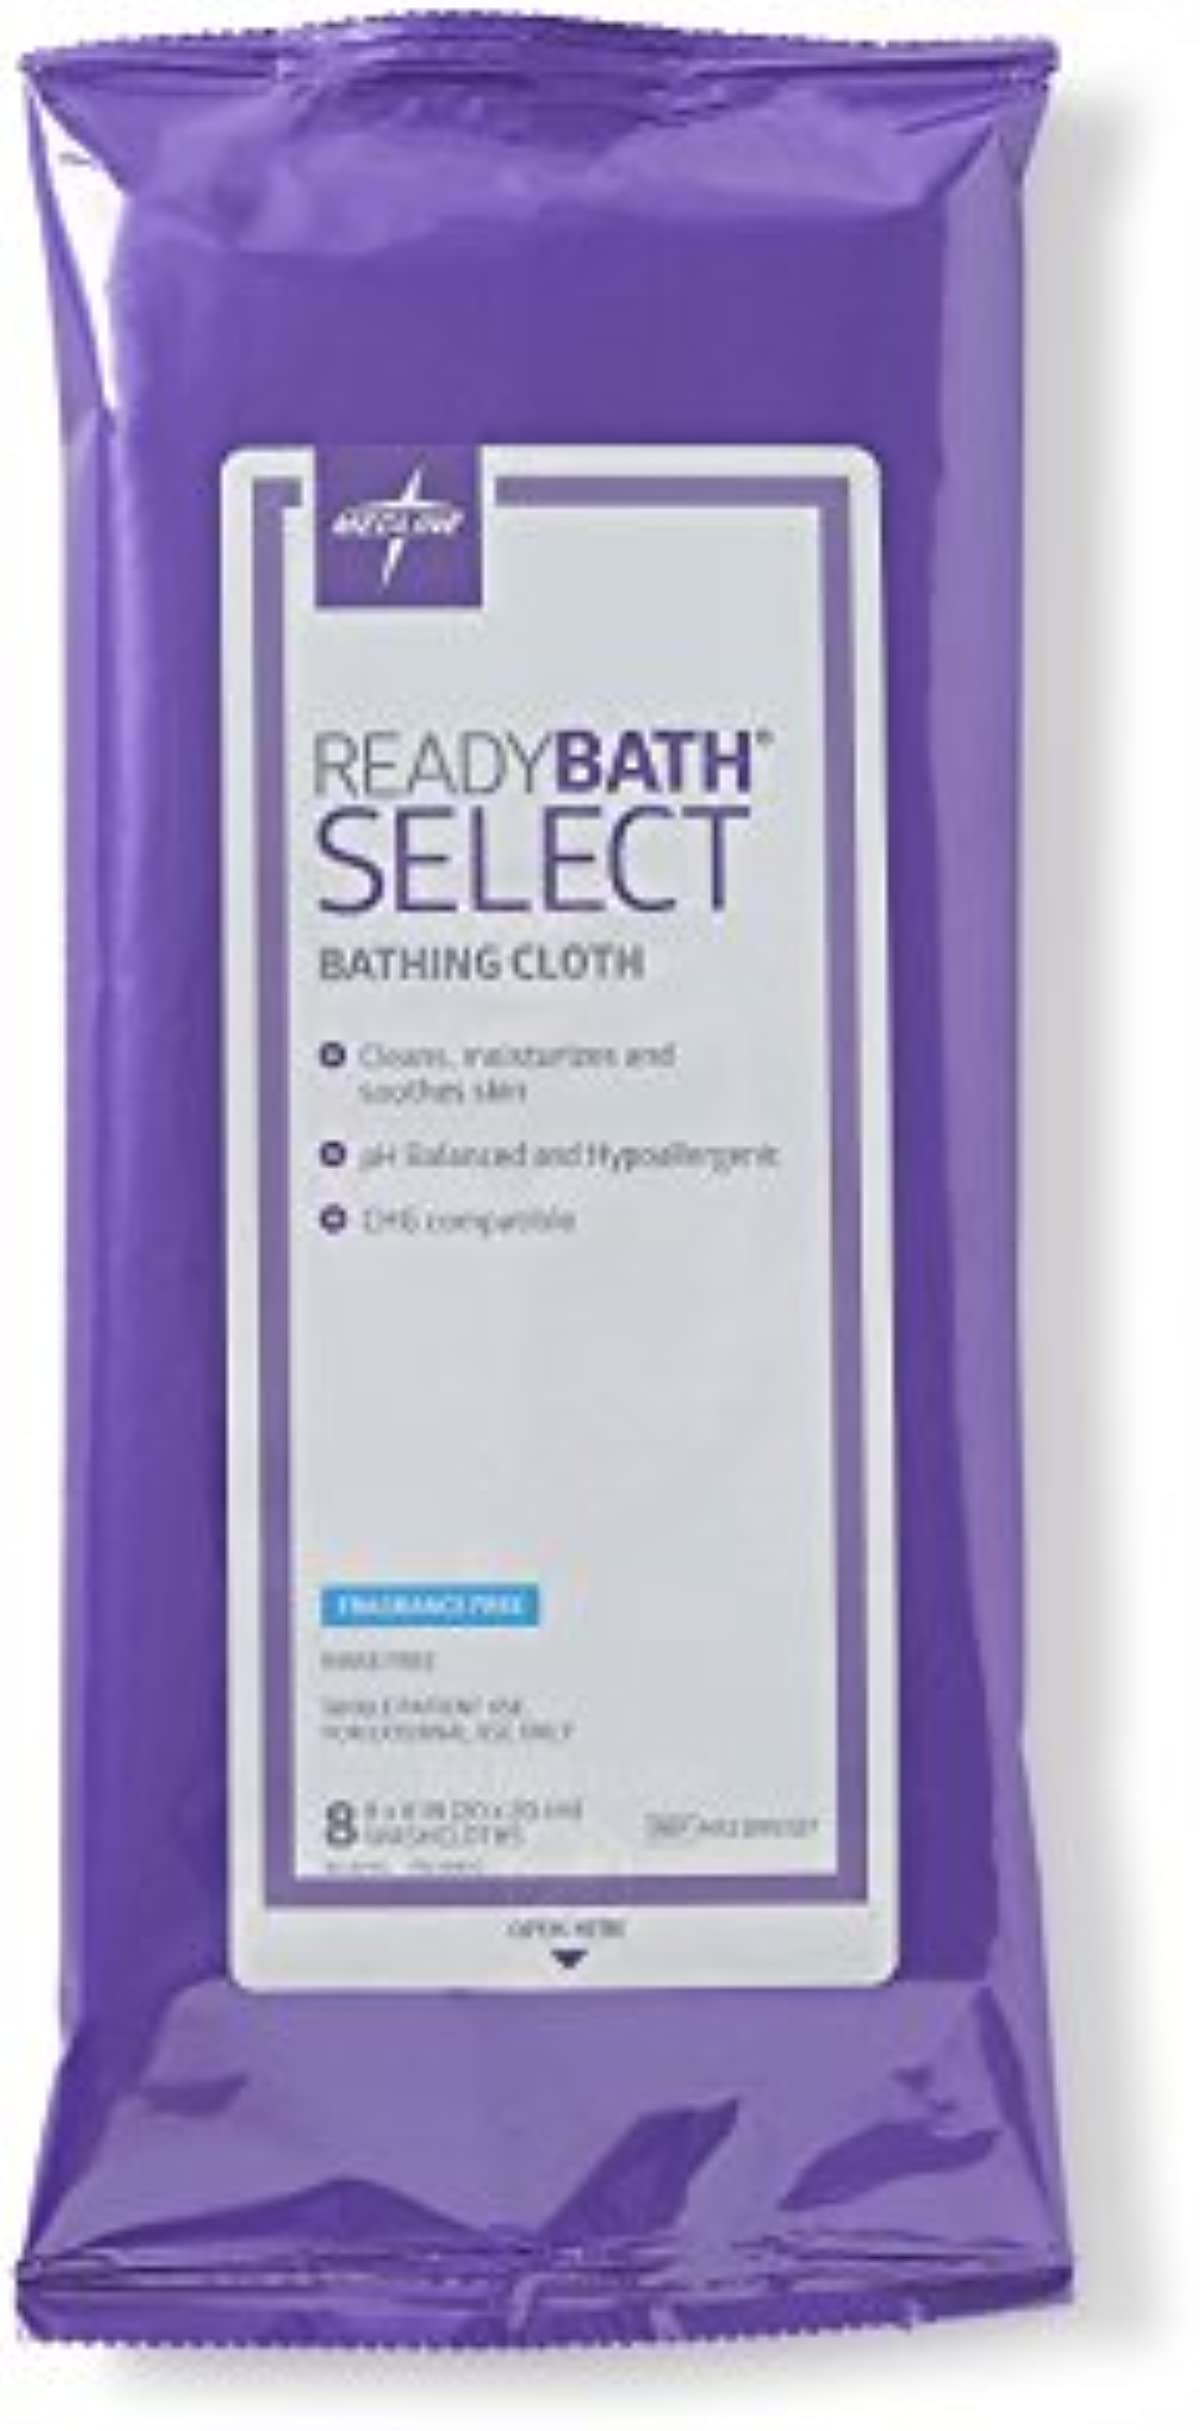 Medline ReadyBath Select Body Cleansing Cloth Wipes, Fragrance Free, Medium Weight Wipes (8 Count Pack, 30 Packs)